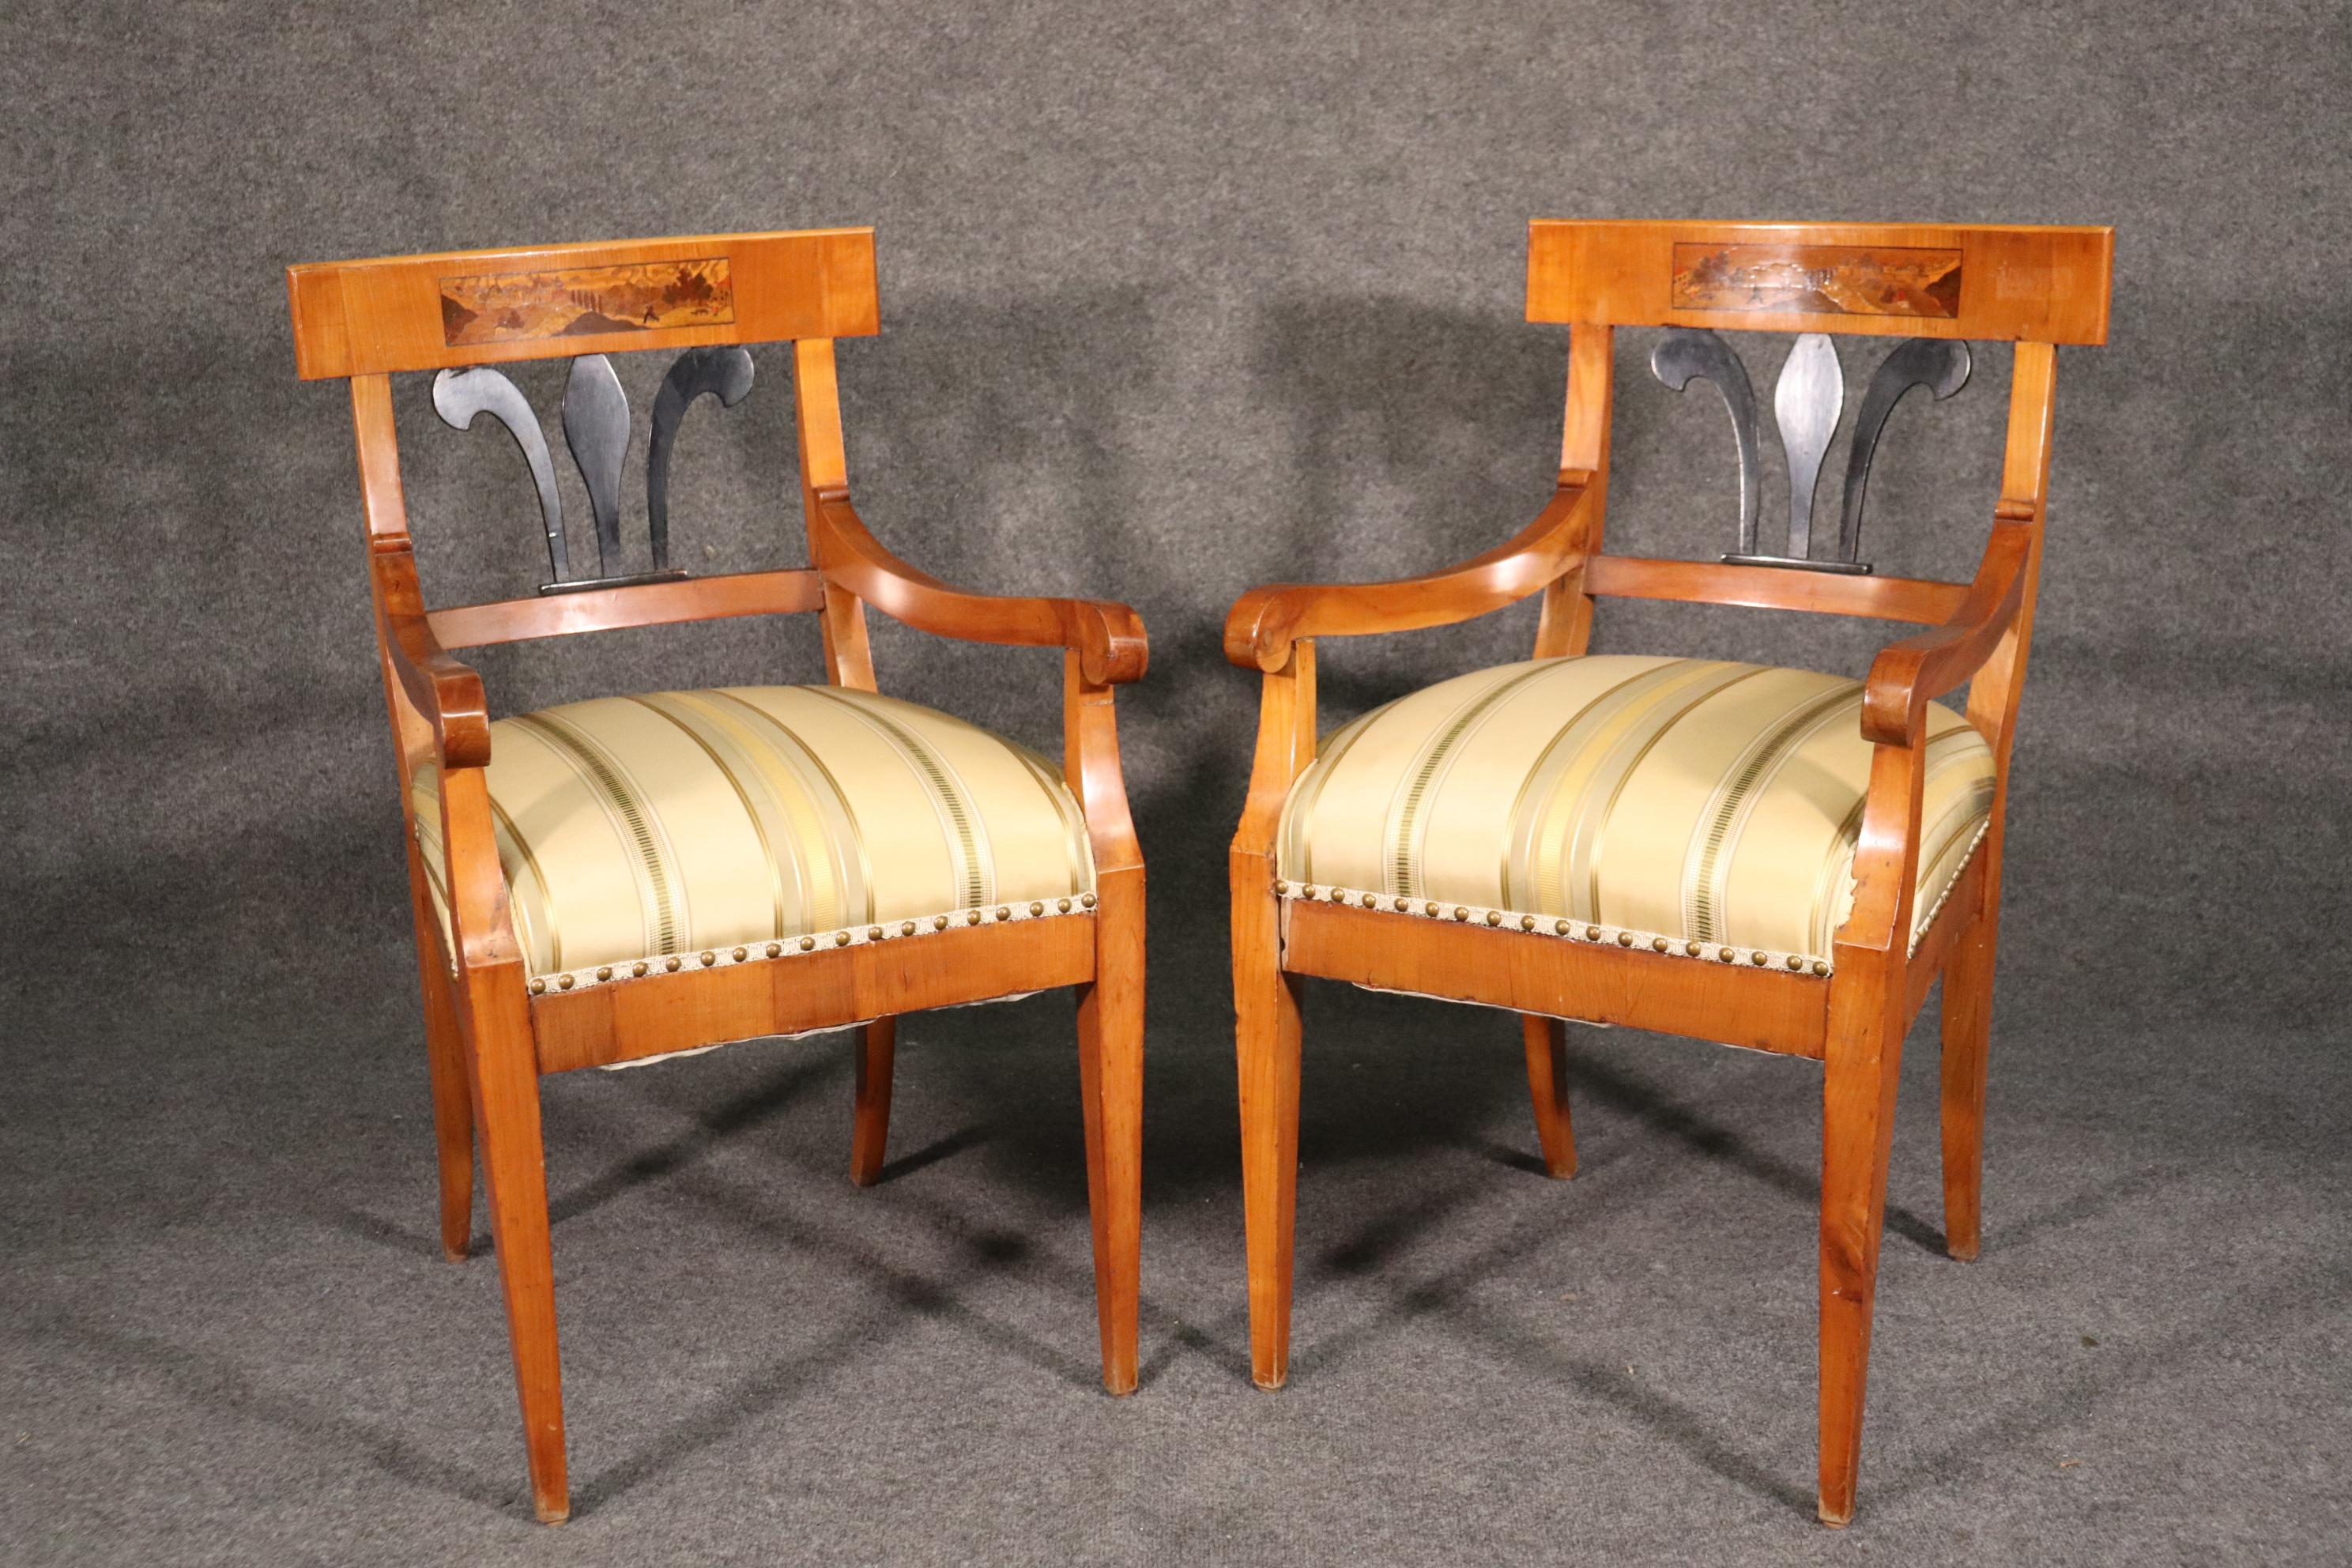 This is a gorgeous set of antique Biedermeier dining chairs with beautiful birch frames and ebonized details on the backs. The chairs are in good condition but will show some age cracks from years of use and are still usable and sound. The chairs